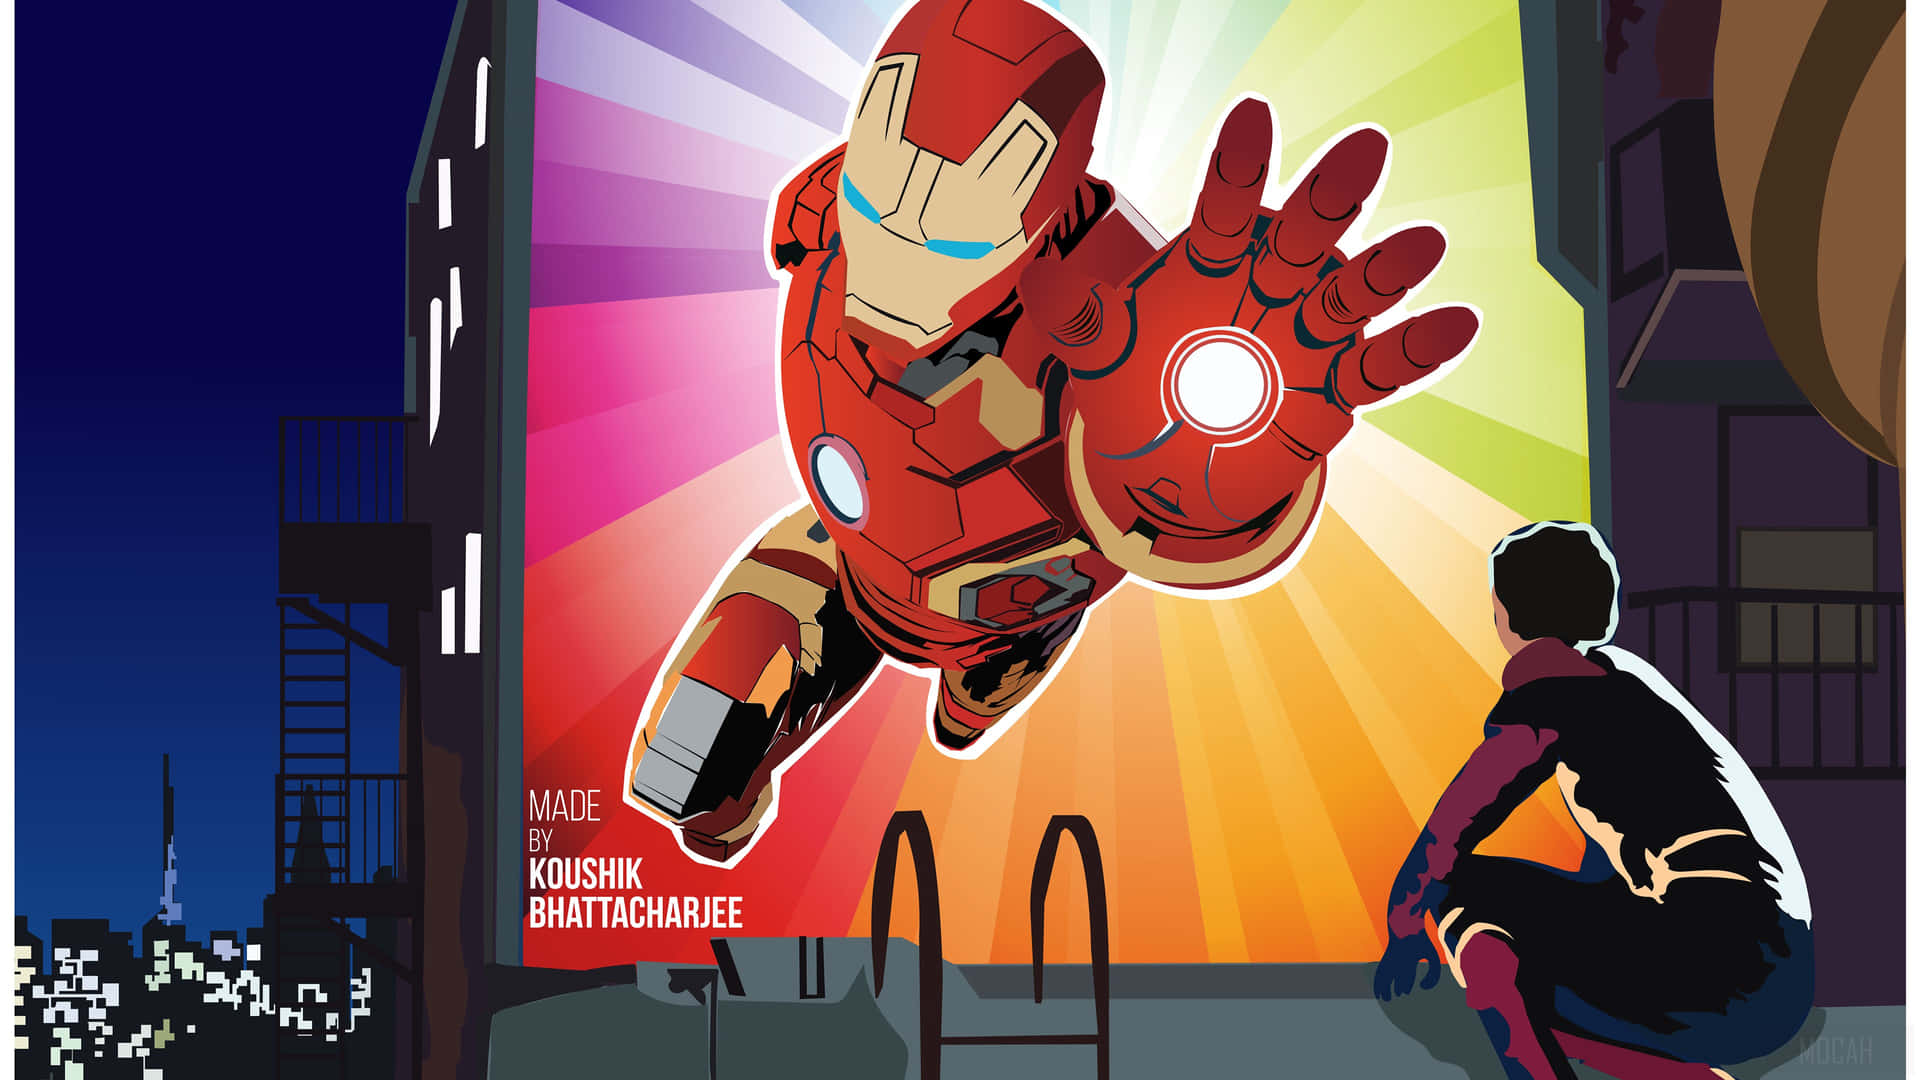 Spider Man&Iron Man standing together against their common foes Wallpaper